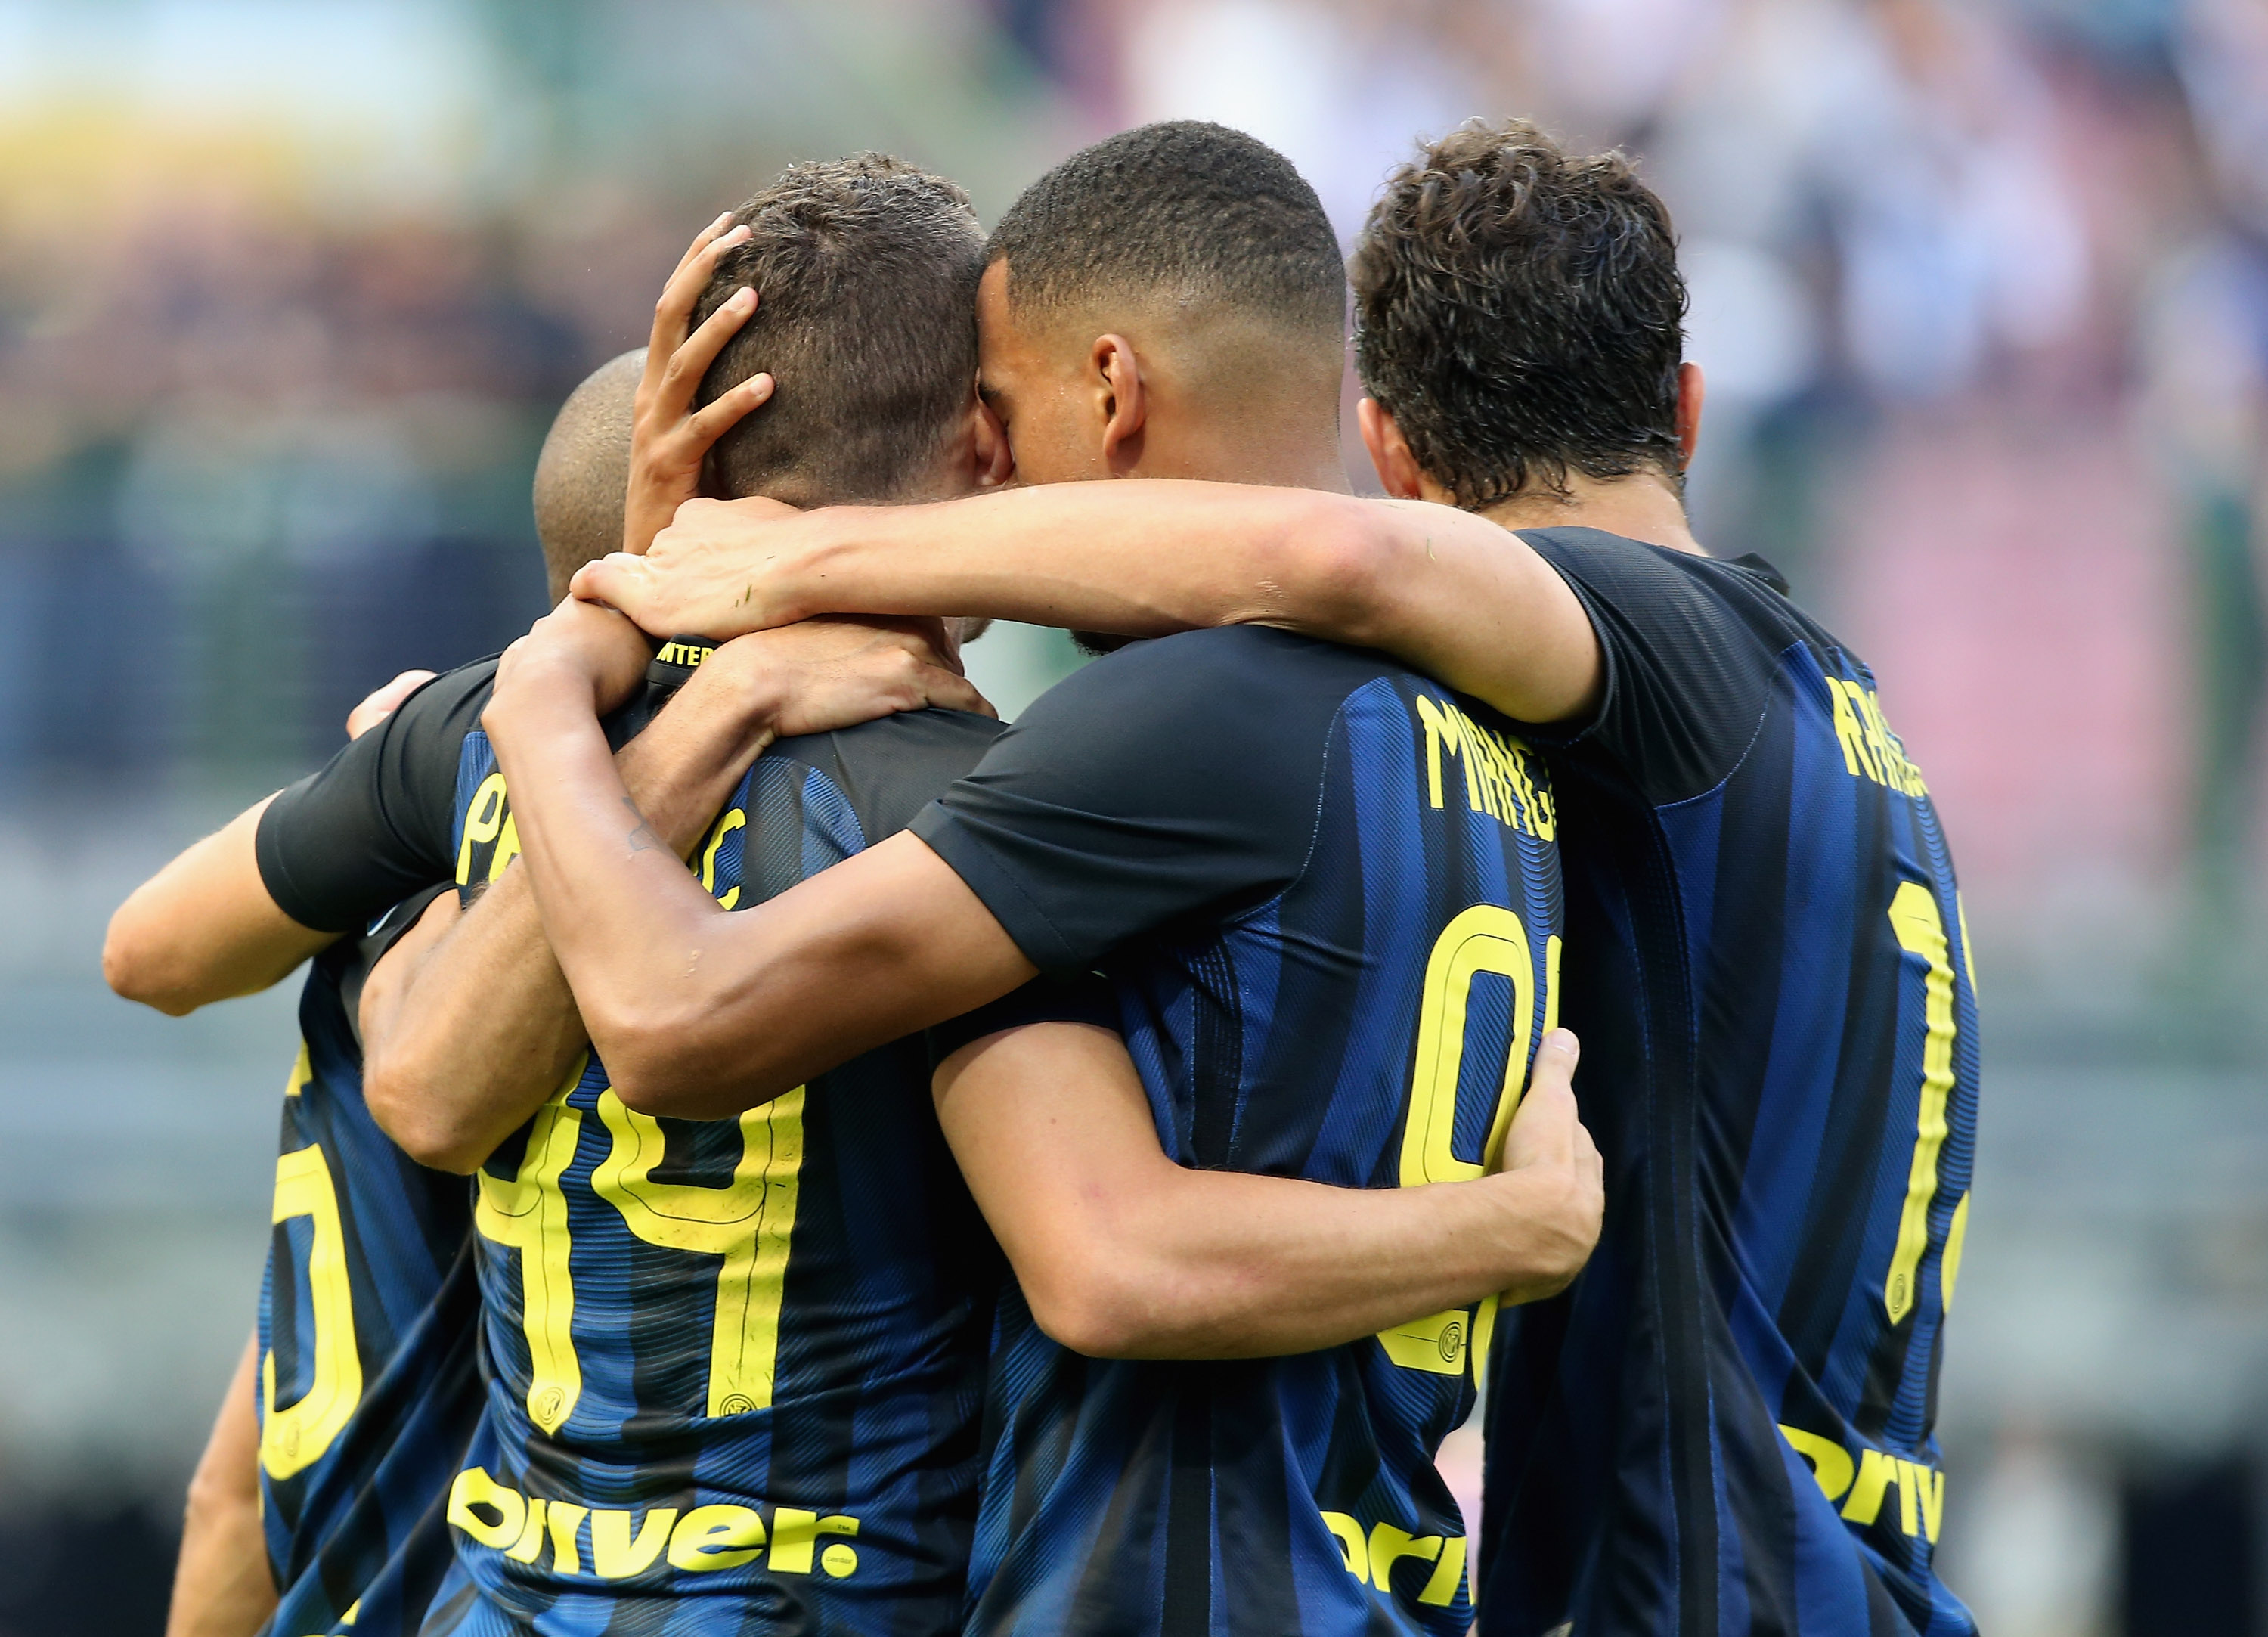 Inter wait for the arrival of National players: Eder, Brozovic, Candreva and…